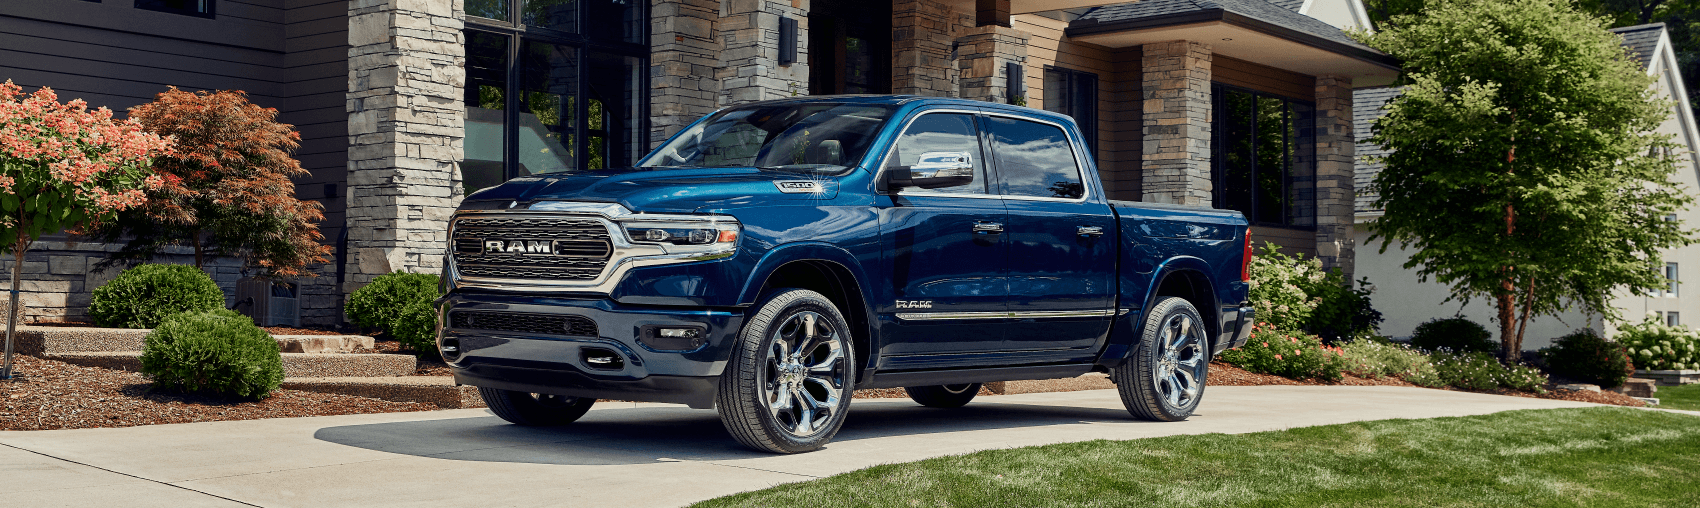 Ram Lineup – Which Ram Is Right for You?